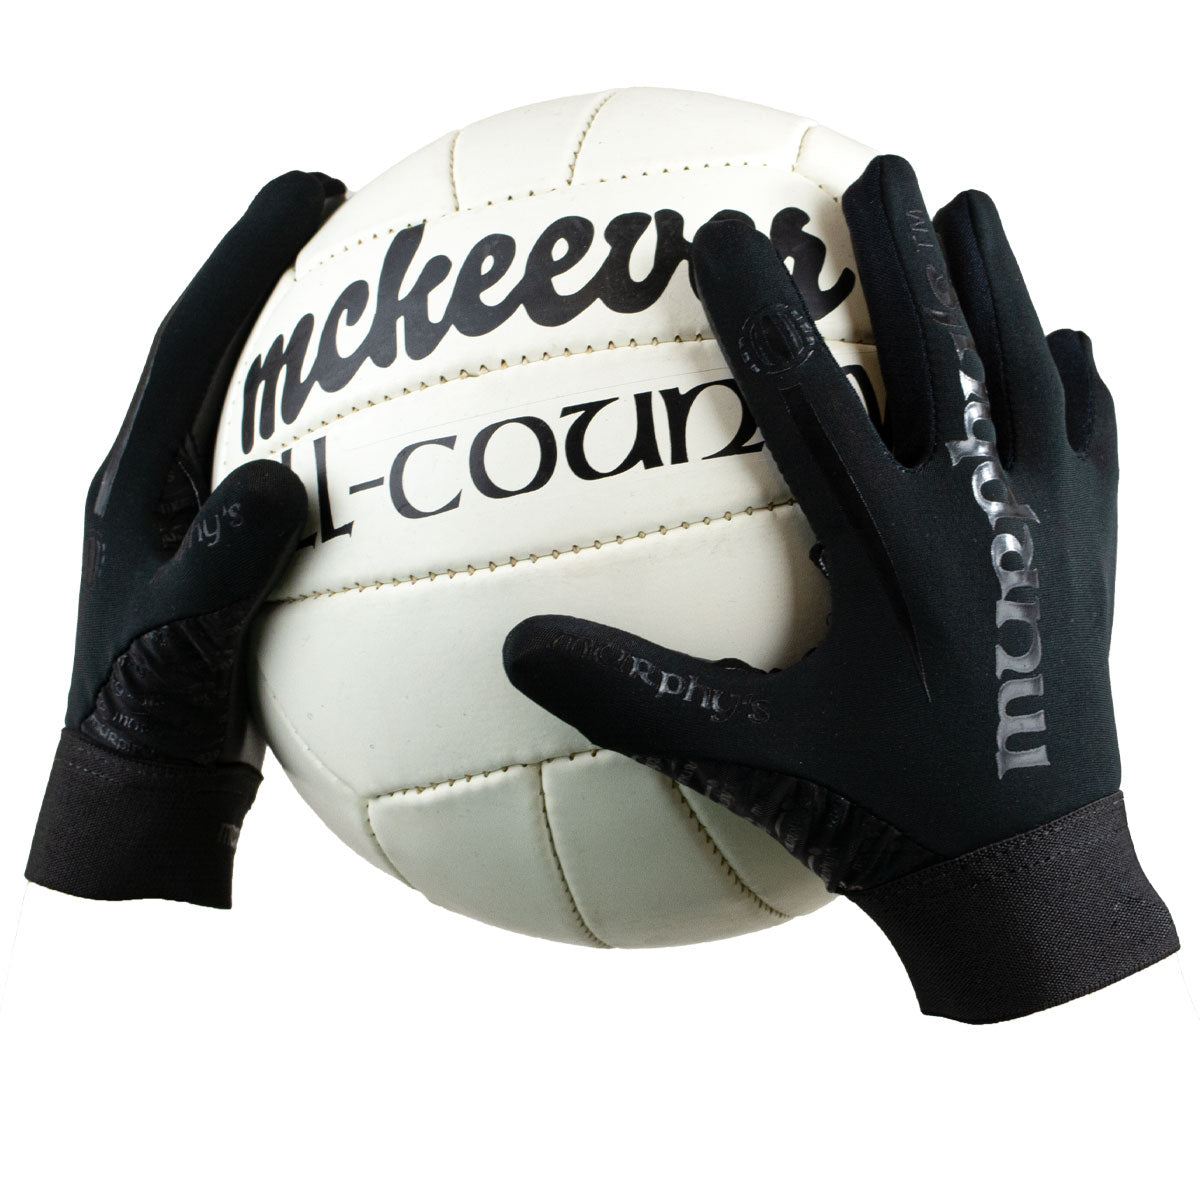 Murphy's Strapless Gaelic Gloves - Youth - Blackout